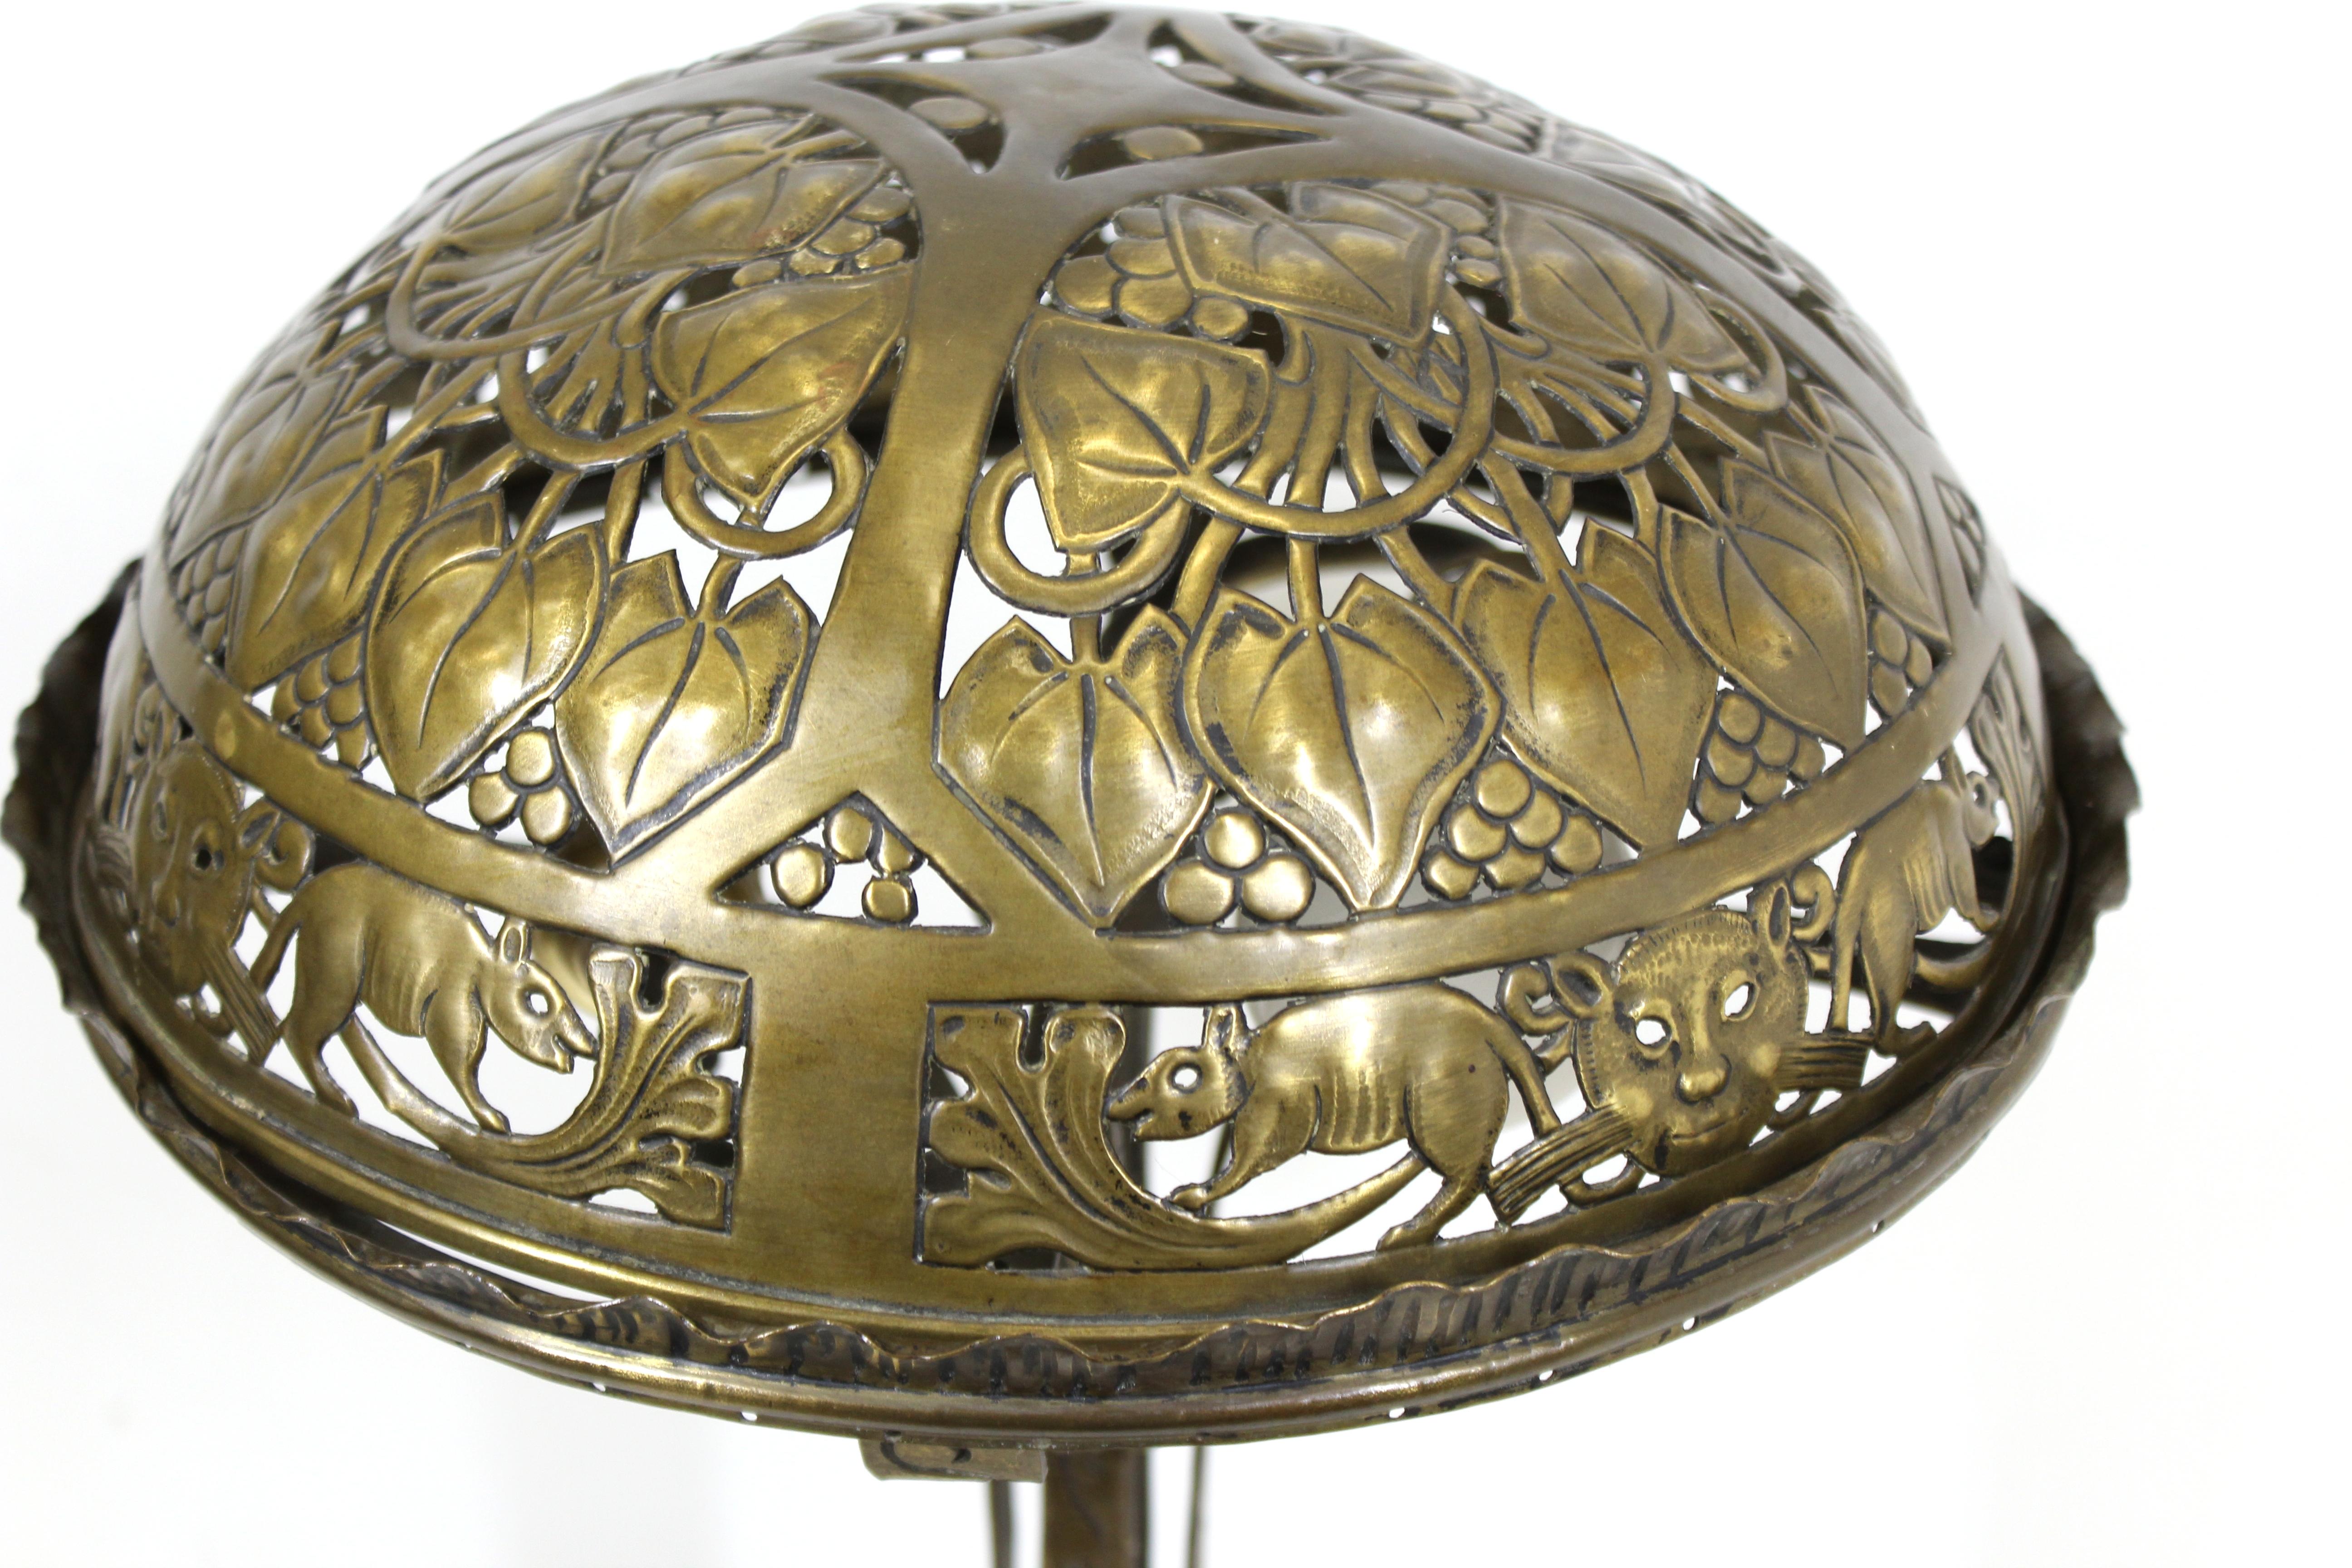 Repoussé German Jugendstil Repousse Brass and Bronze Table Lamp Attributed to Oscar Bach For Sale